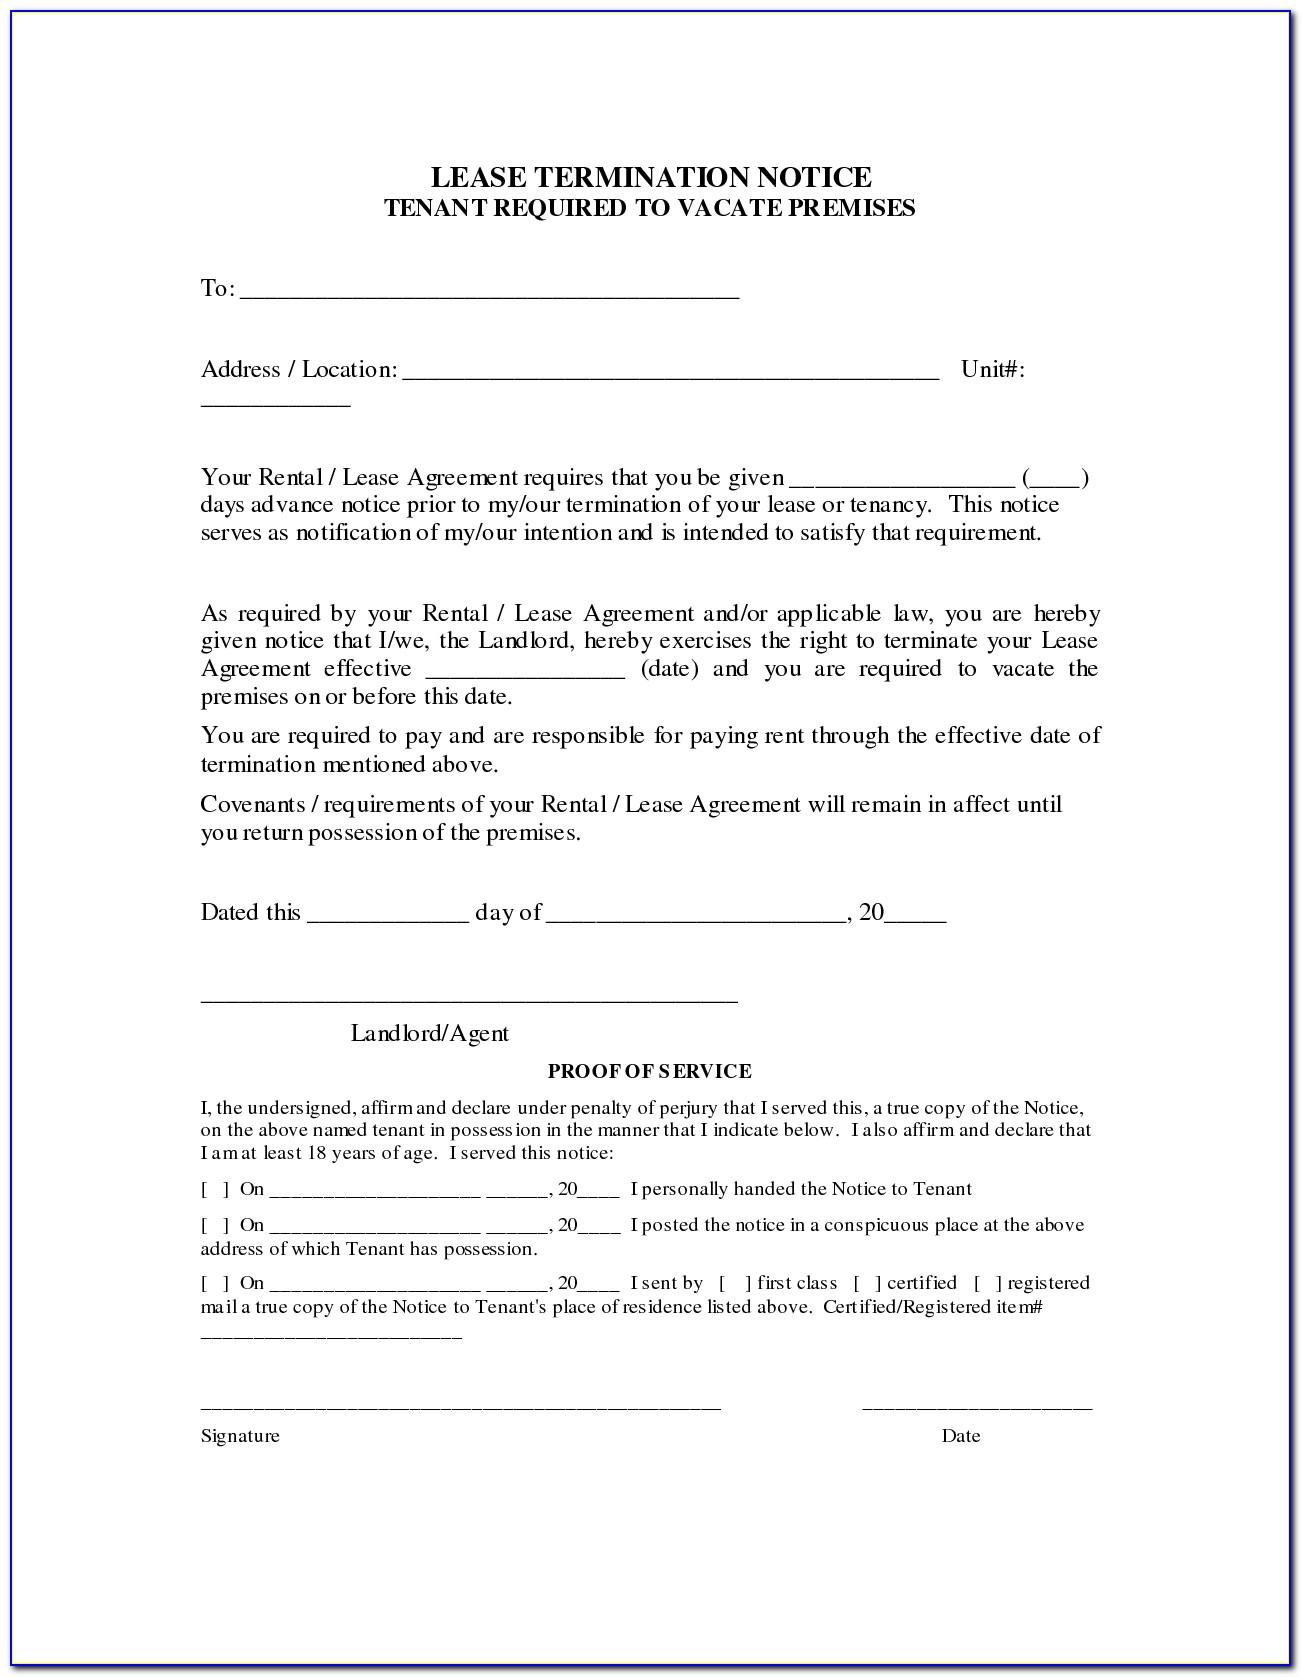 Tenant Lease Agreement Form Bc